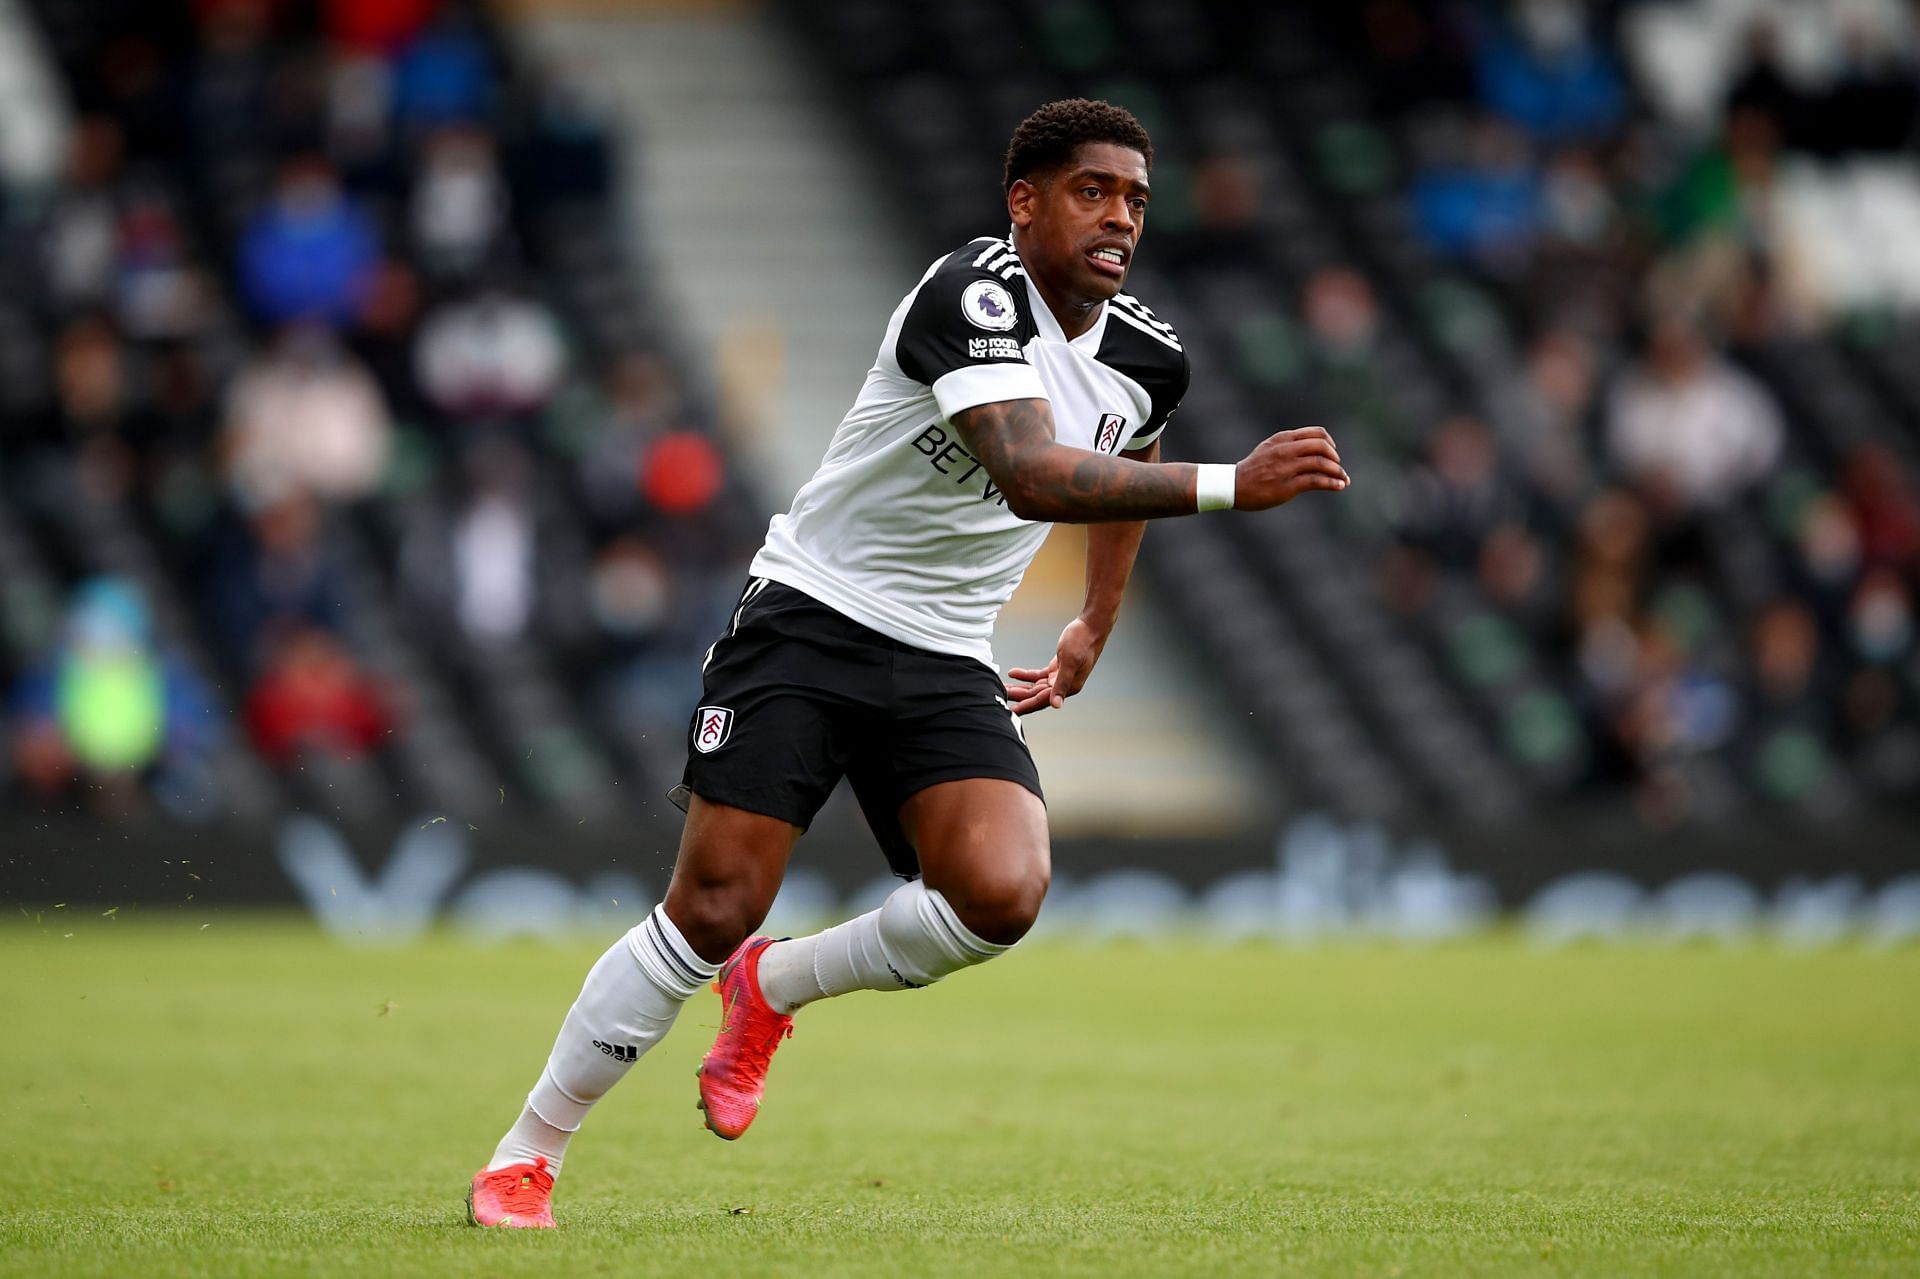 Cavaleiro will be a huge miss for Fulham